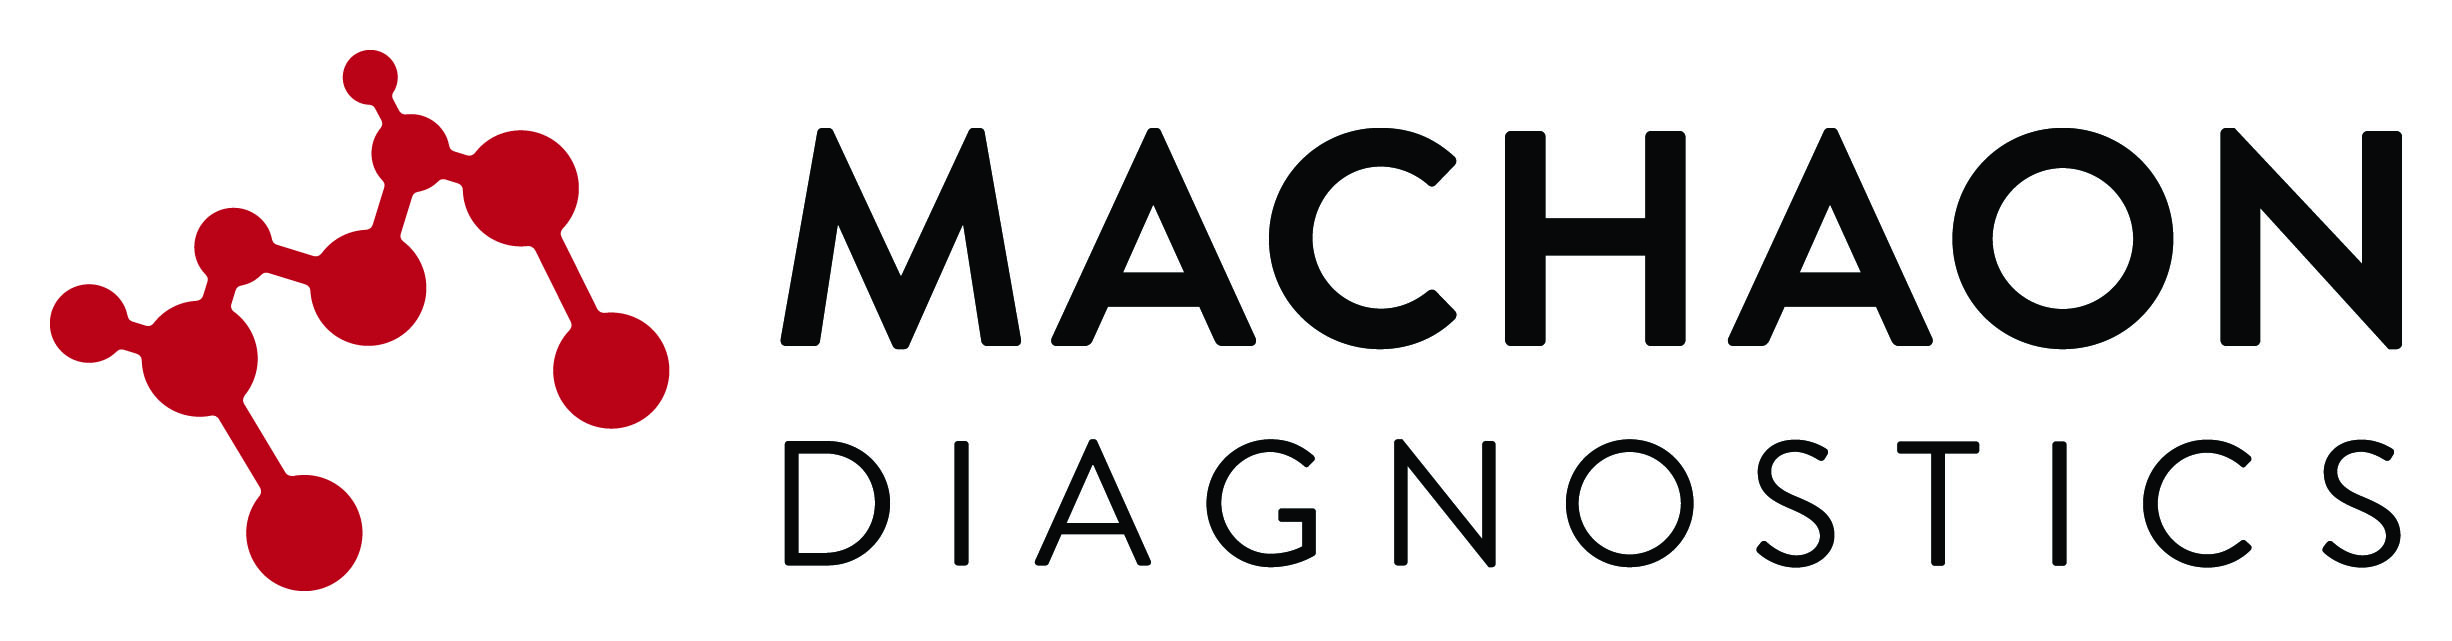 Machaon Diagnostics, Inc.  - Machaon Diagnostics  is a clinical reference laboratory and contract research organization (CRO) spe